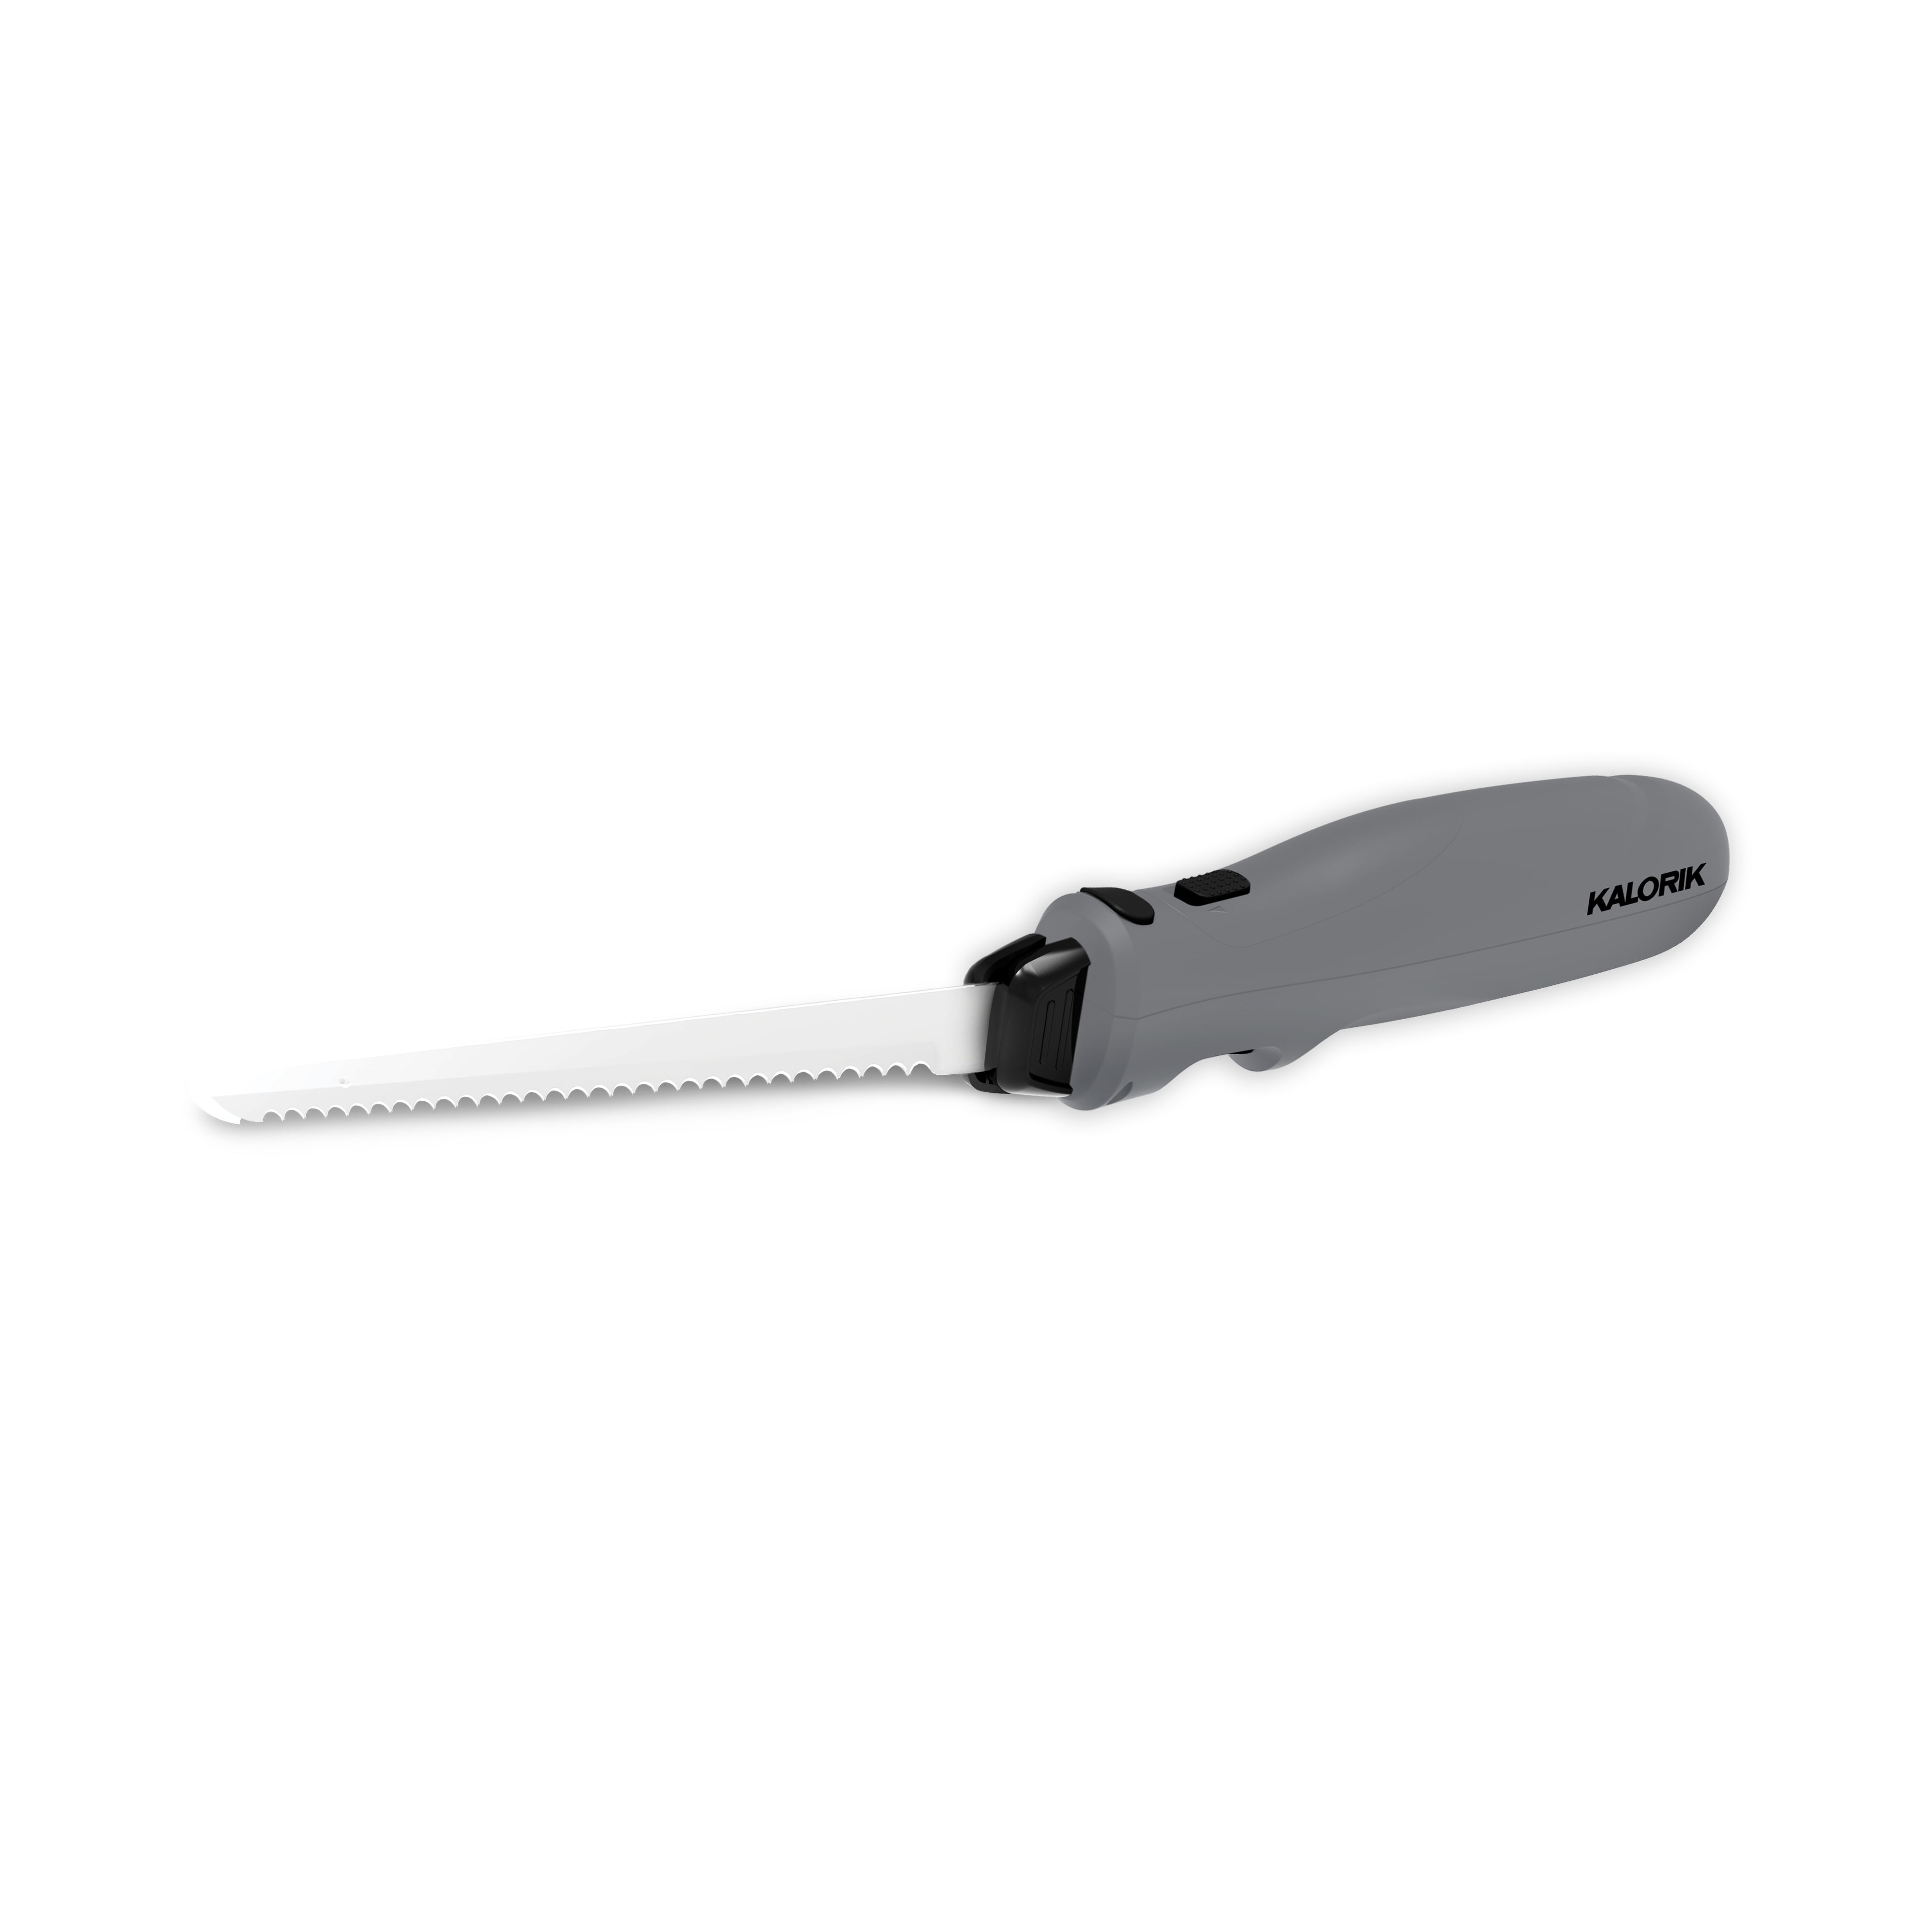 Kalorik Black Stainless Steel Cordless Electric Knife with Fish